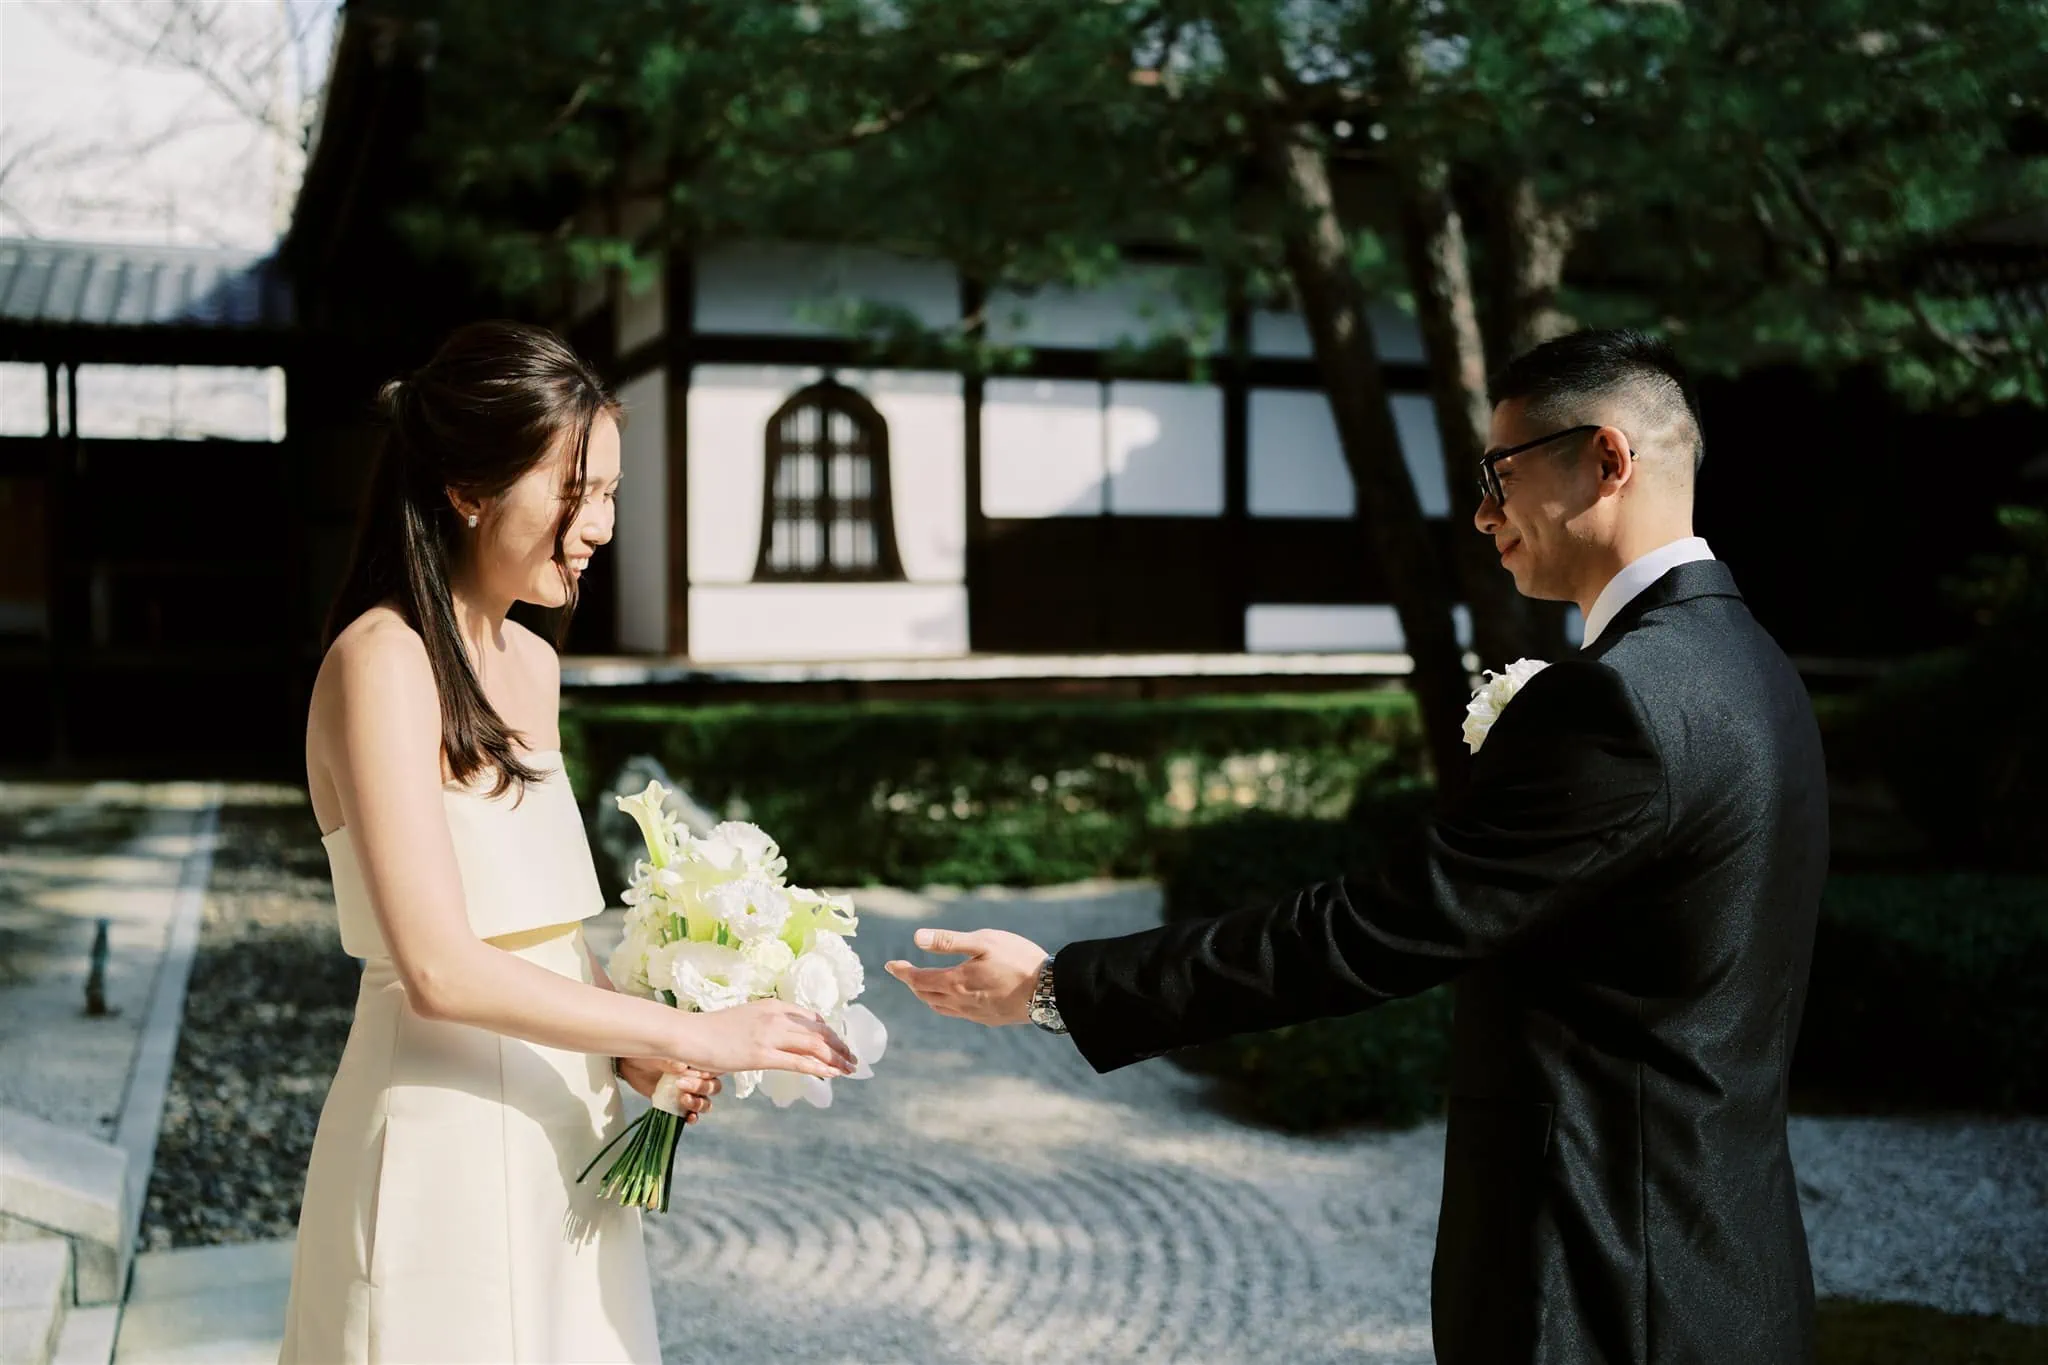 Kyoto Tokyo Japan Elopement Wedding Photographer, Planner & Videographer | A bride and groom are exchanging a gift in a serene Japanese garden during their elopement in Japan.